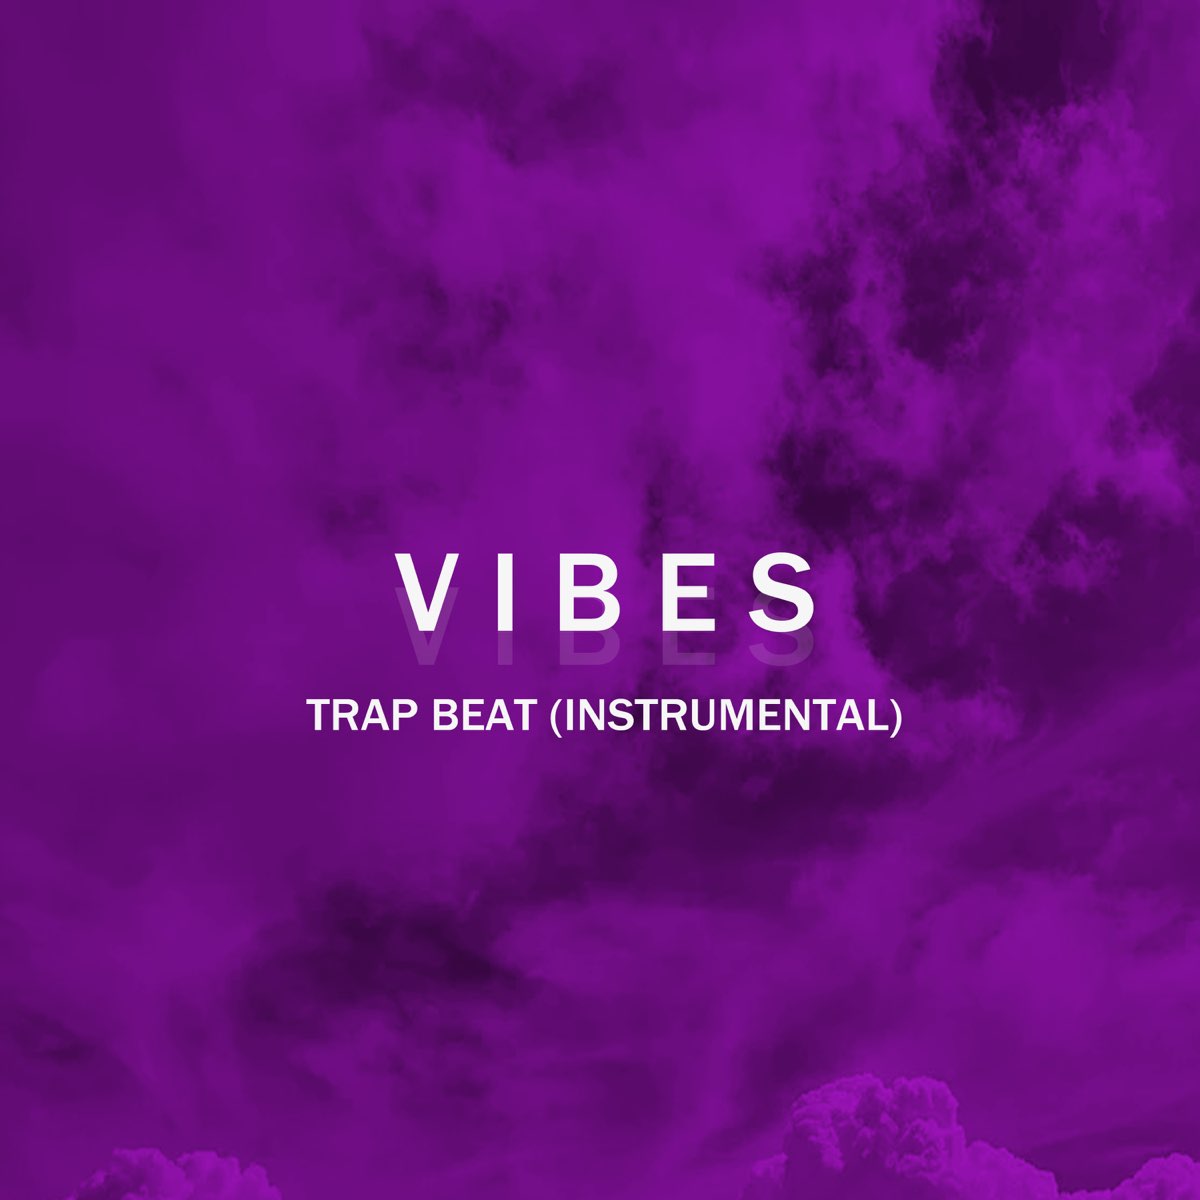 Vibes Trap Beat (Instrumental) - Single by Sp no Beat on Apple Music